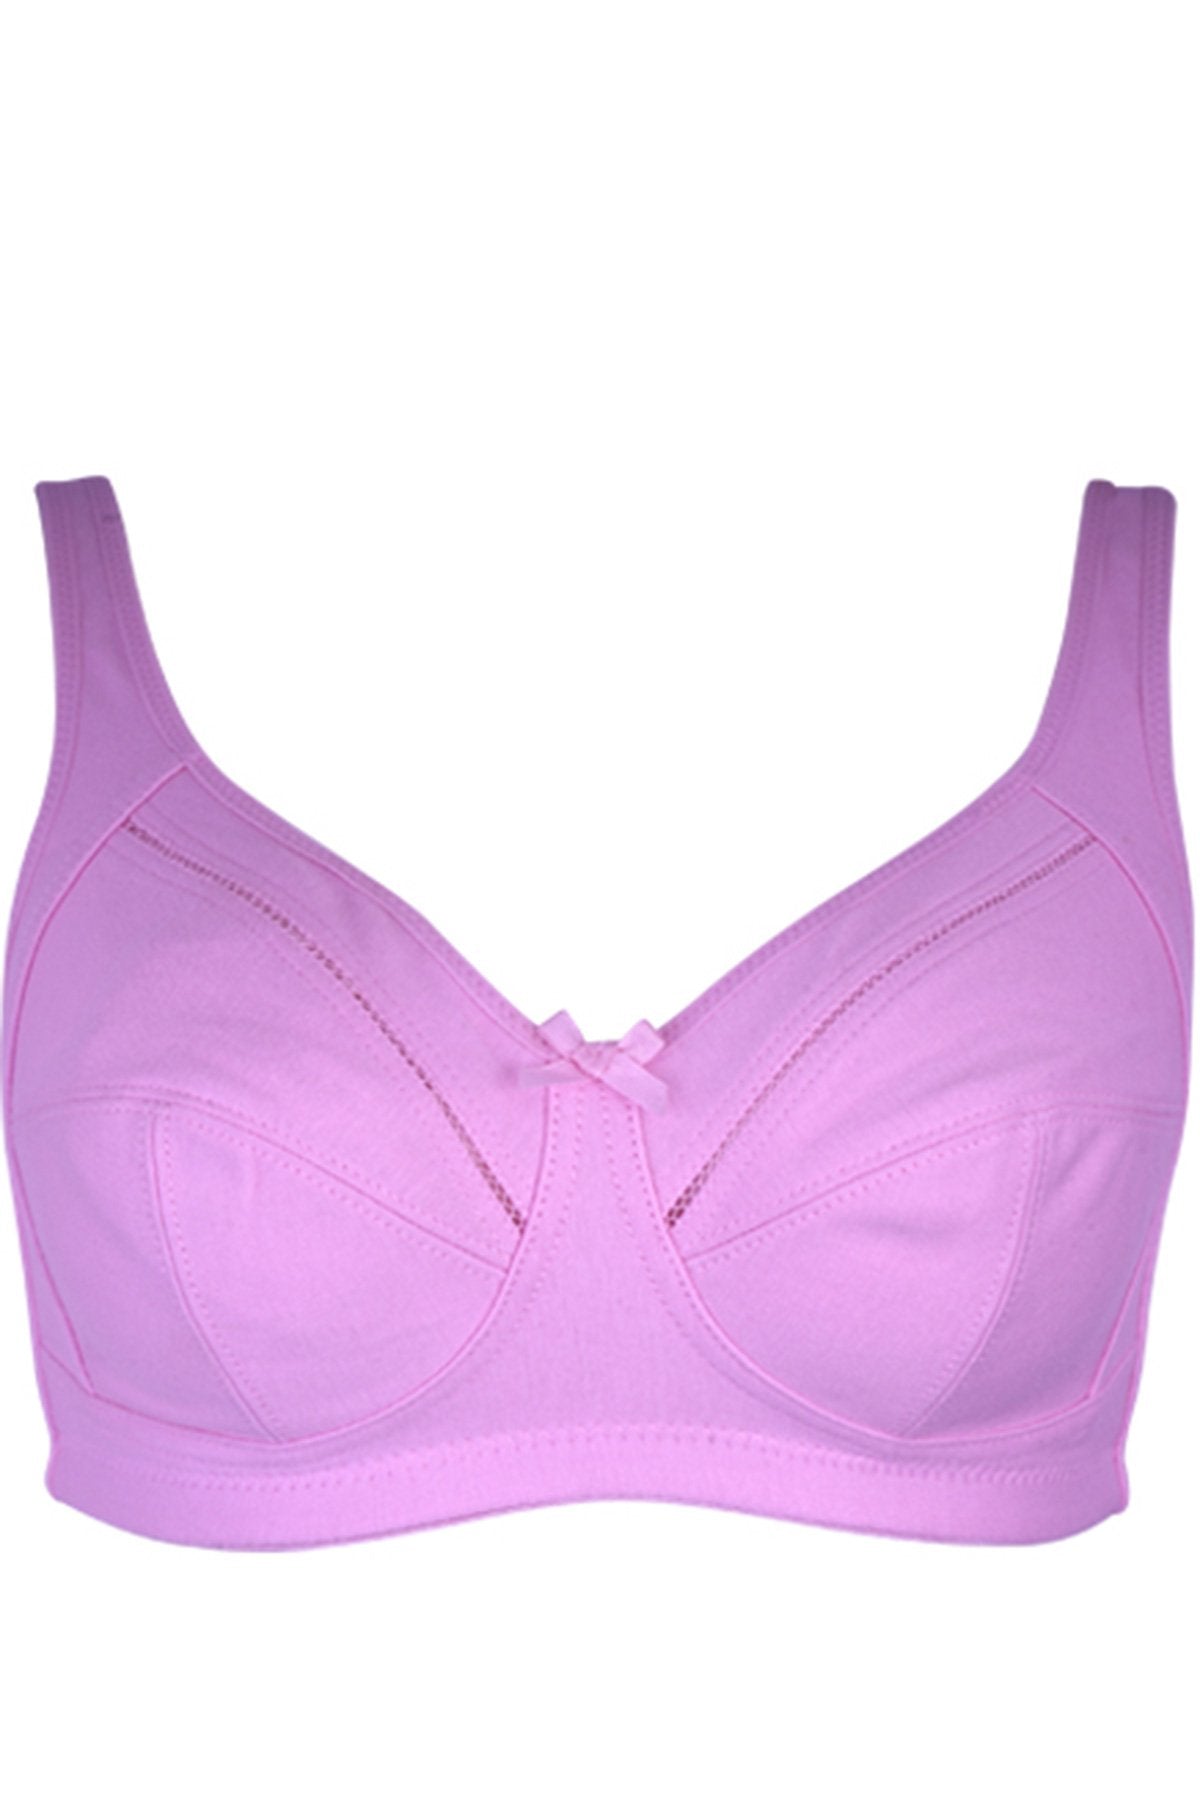 BLS - Celia Non Wired And Non Padded Cotton Bra - Pink